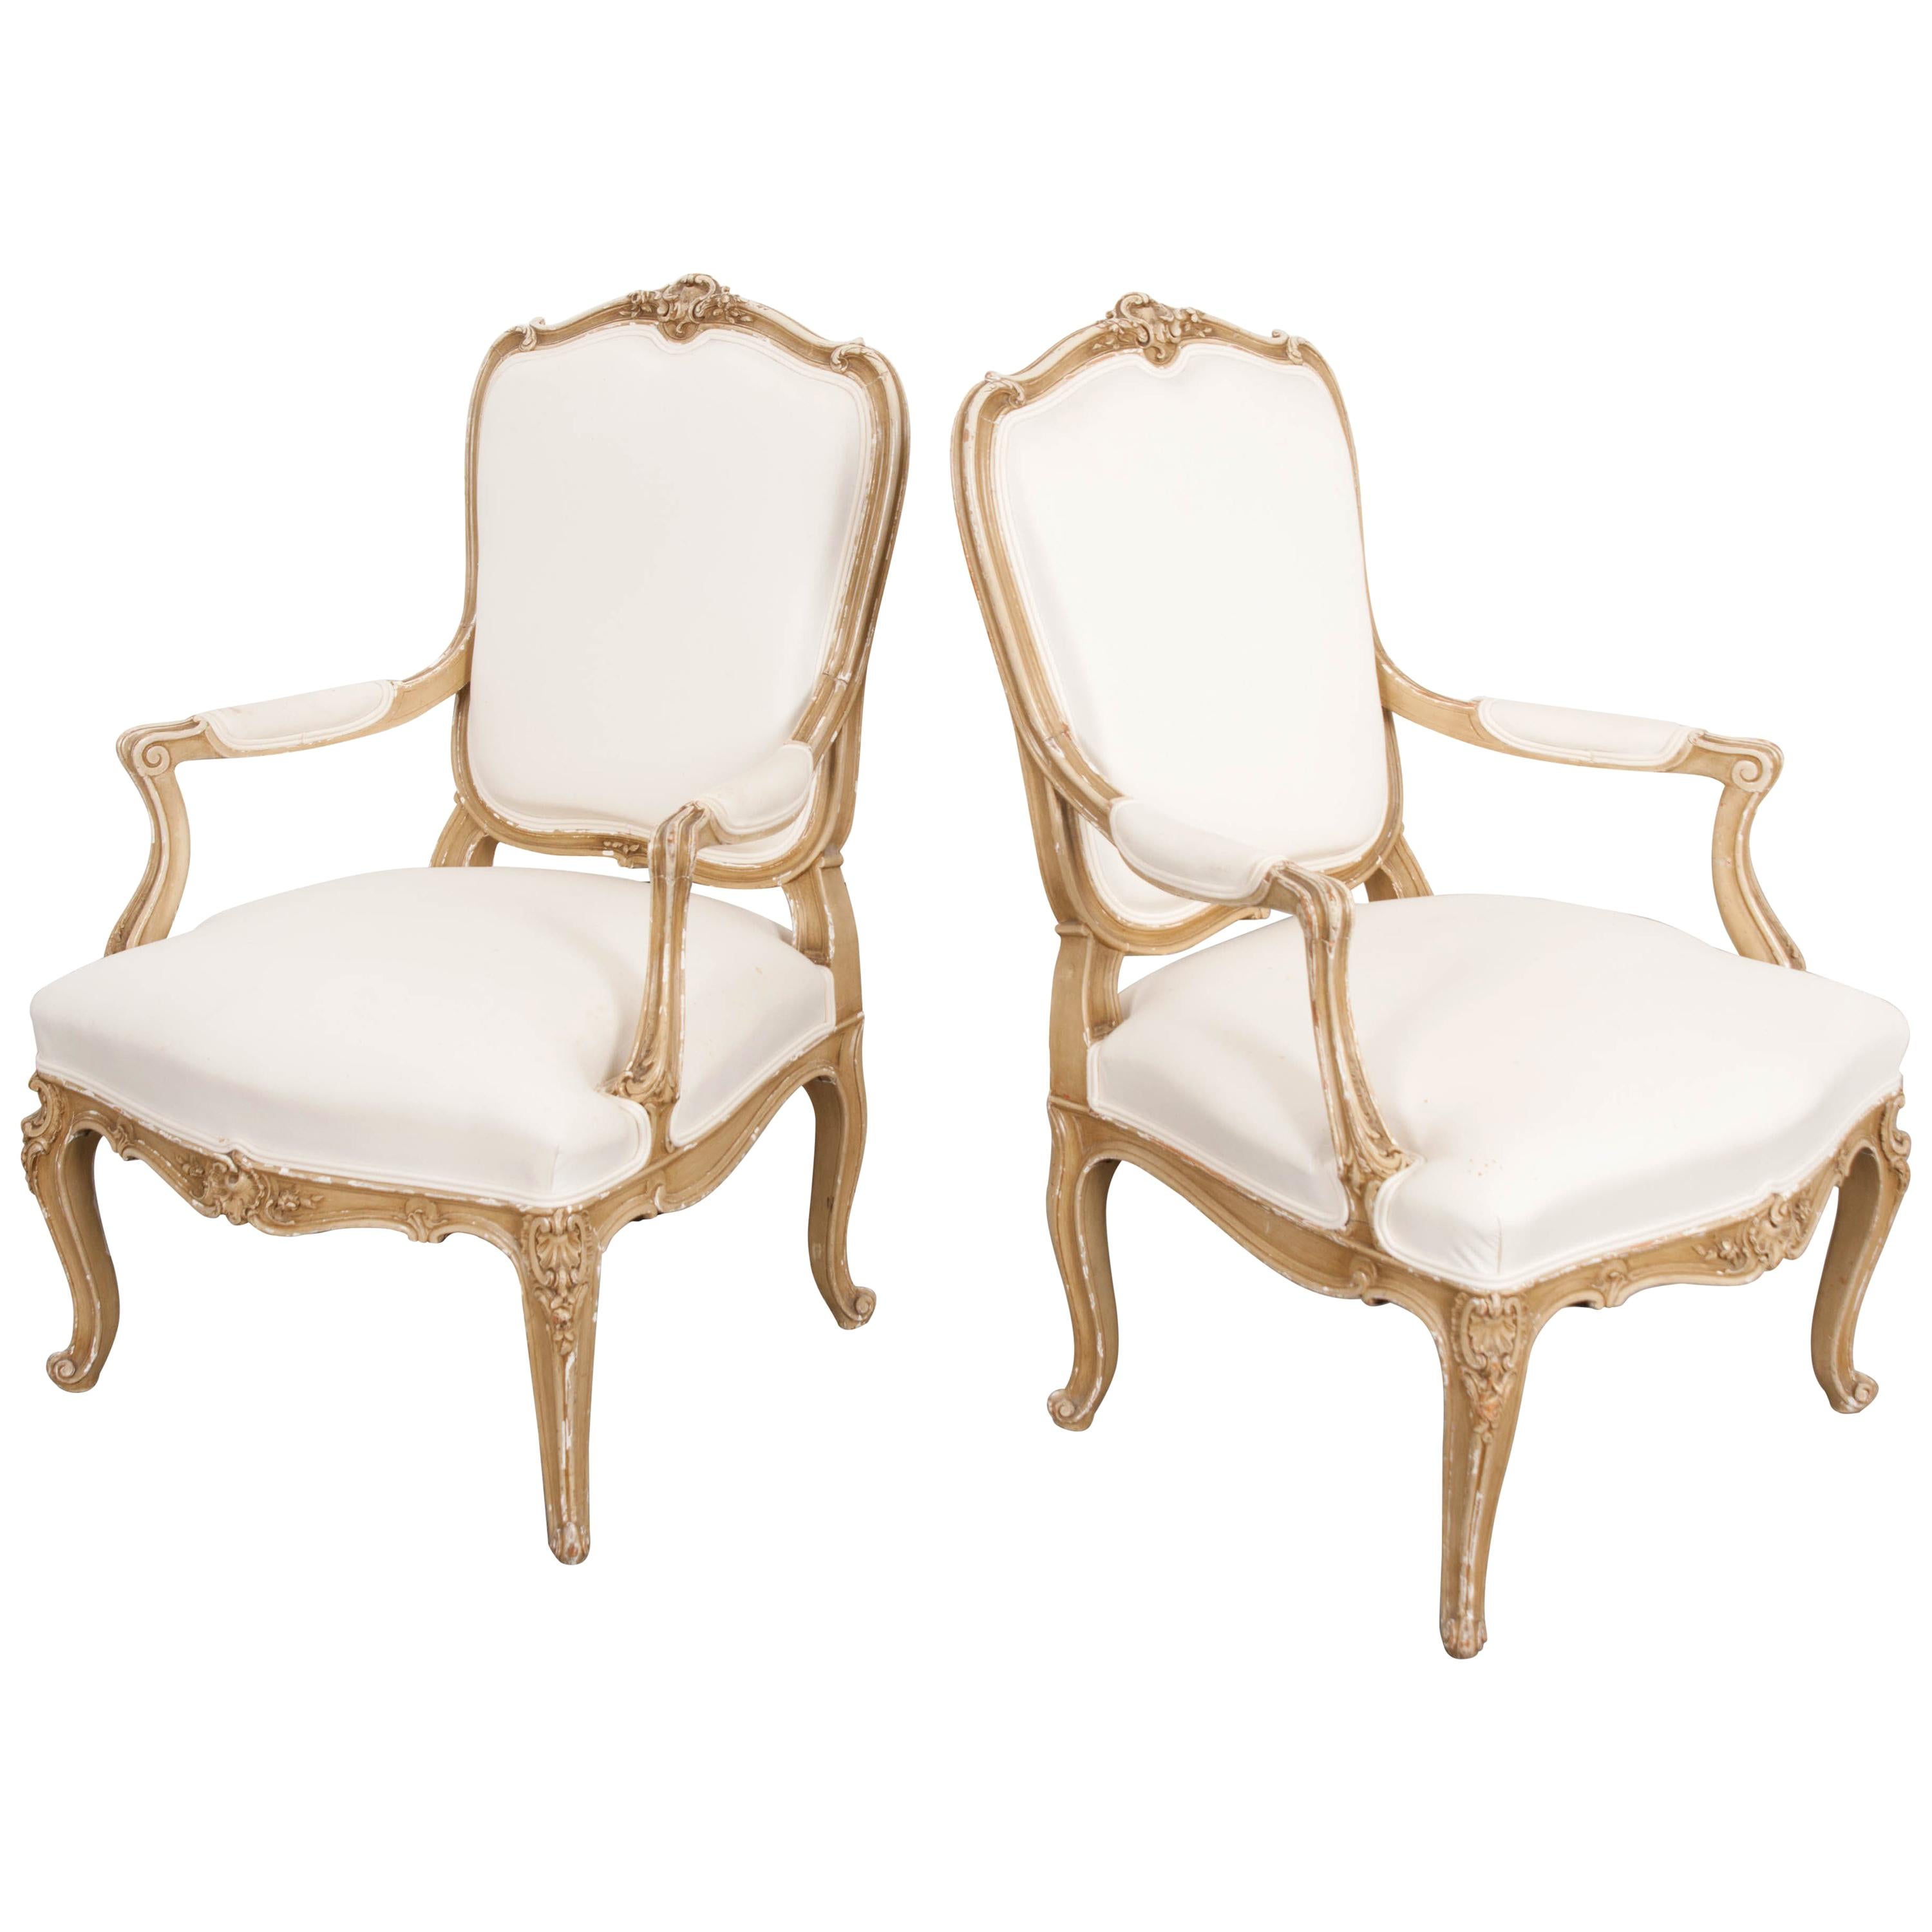 Pair of 19th Century French Painted Louis XV Fauteuils